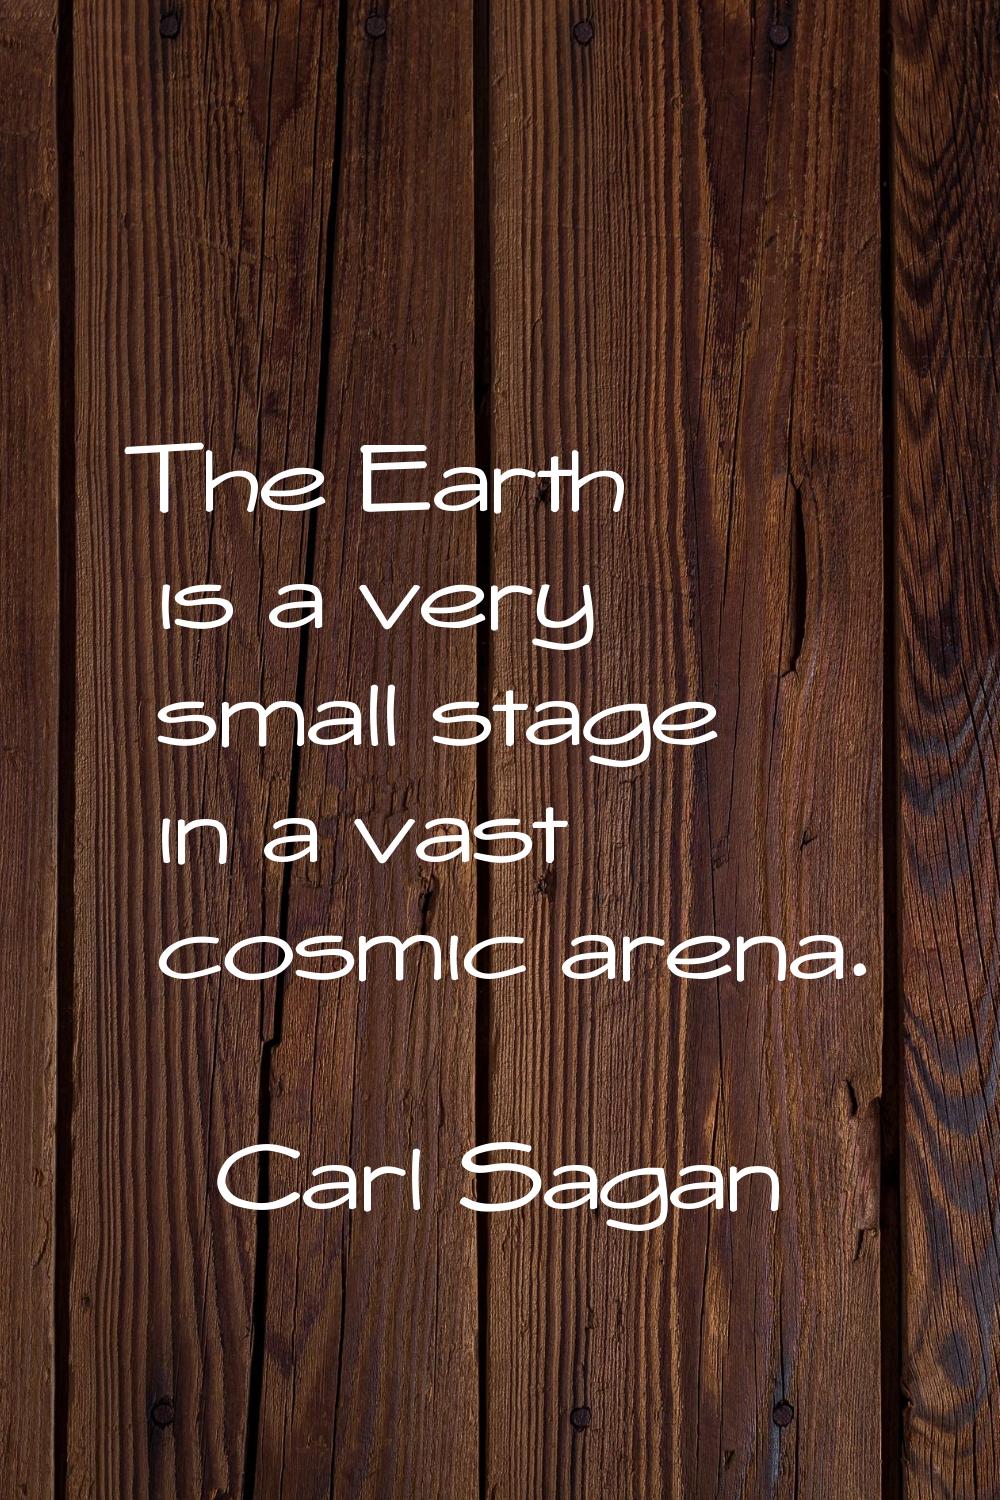 The Earth is a very small stage in a vast cosmic arena.